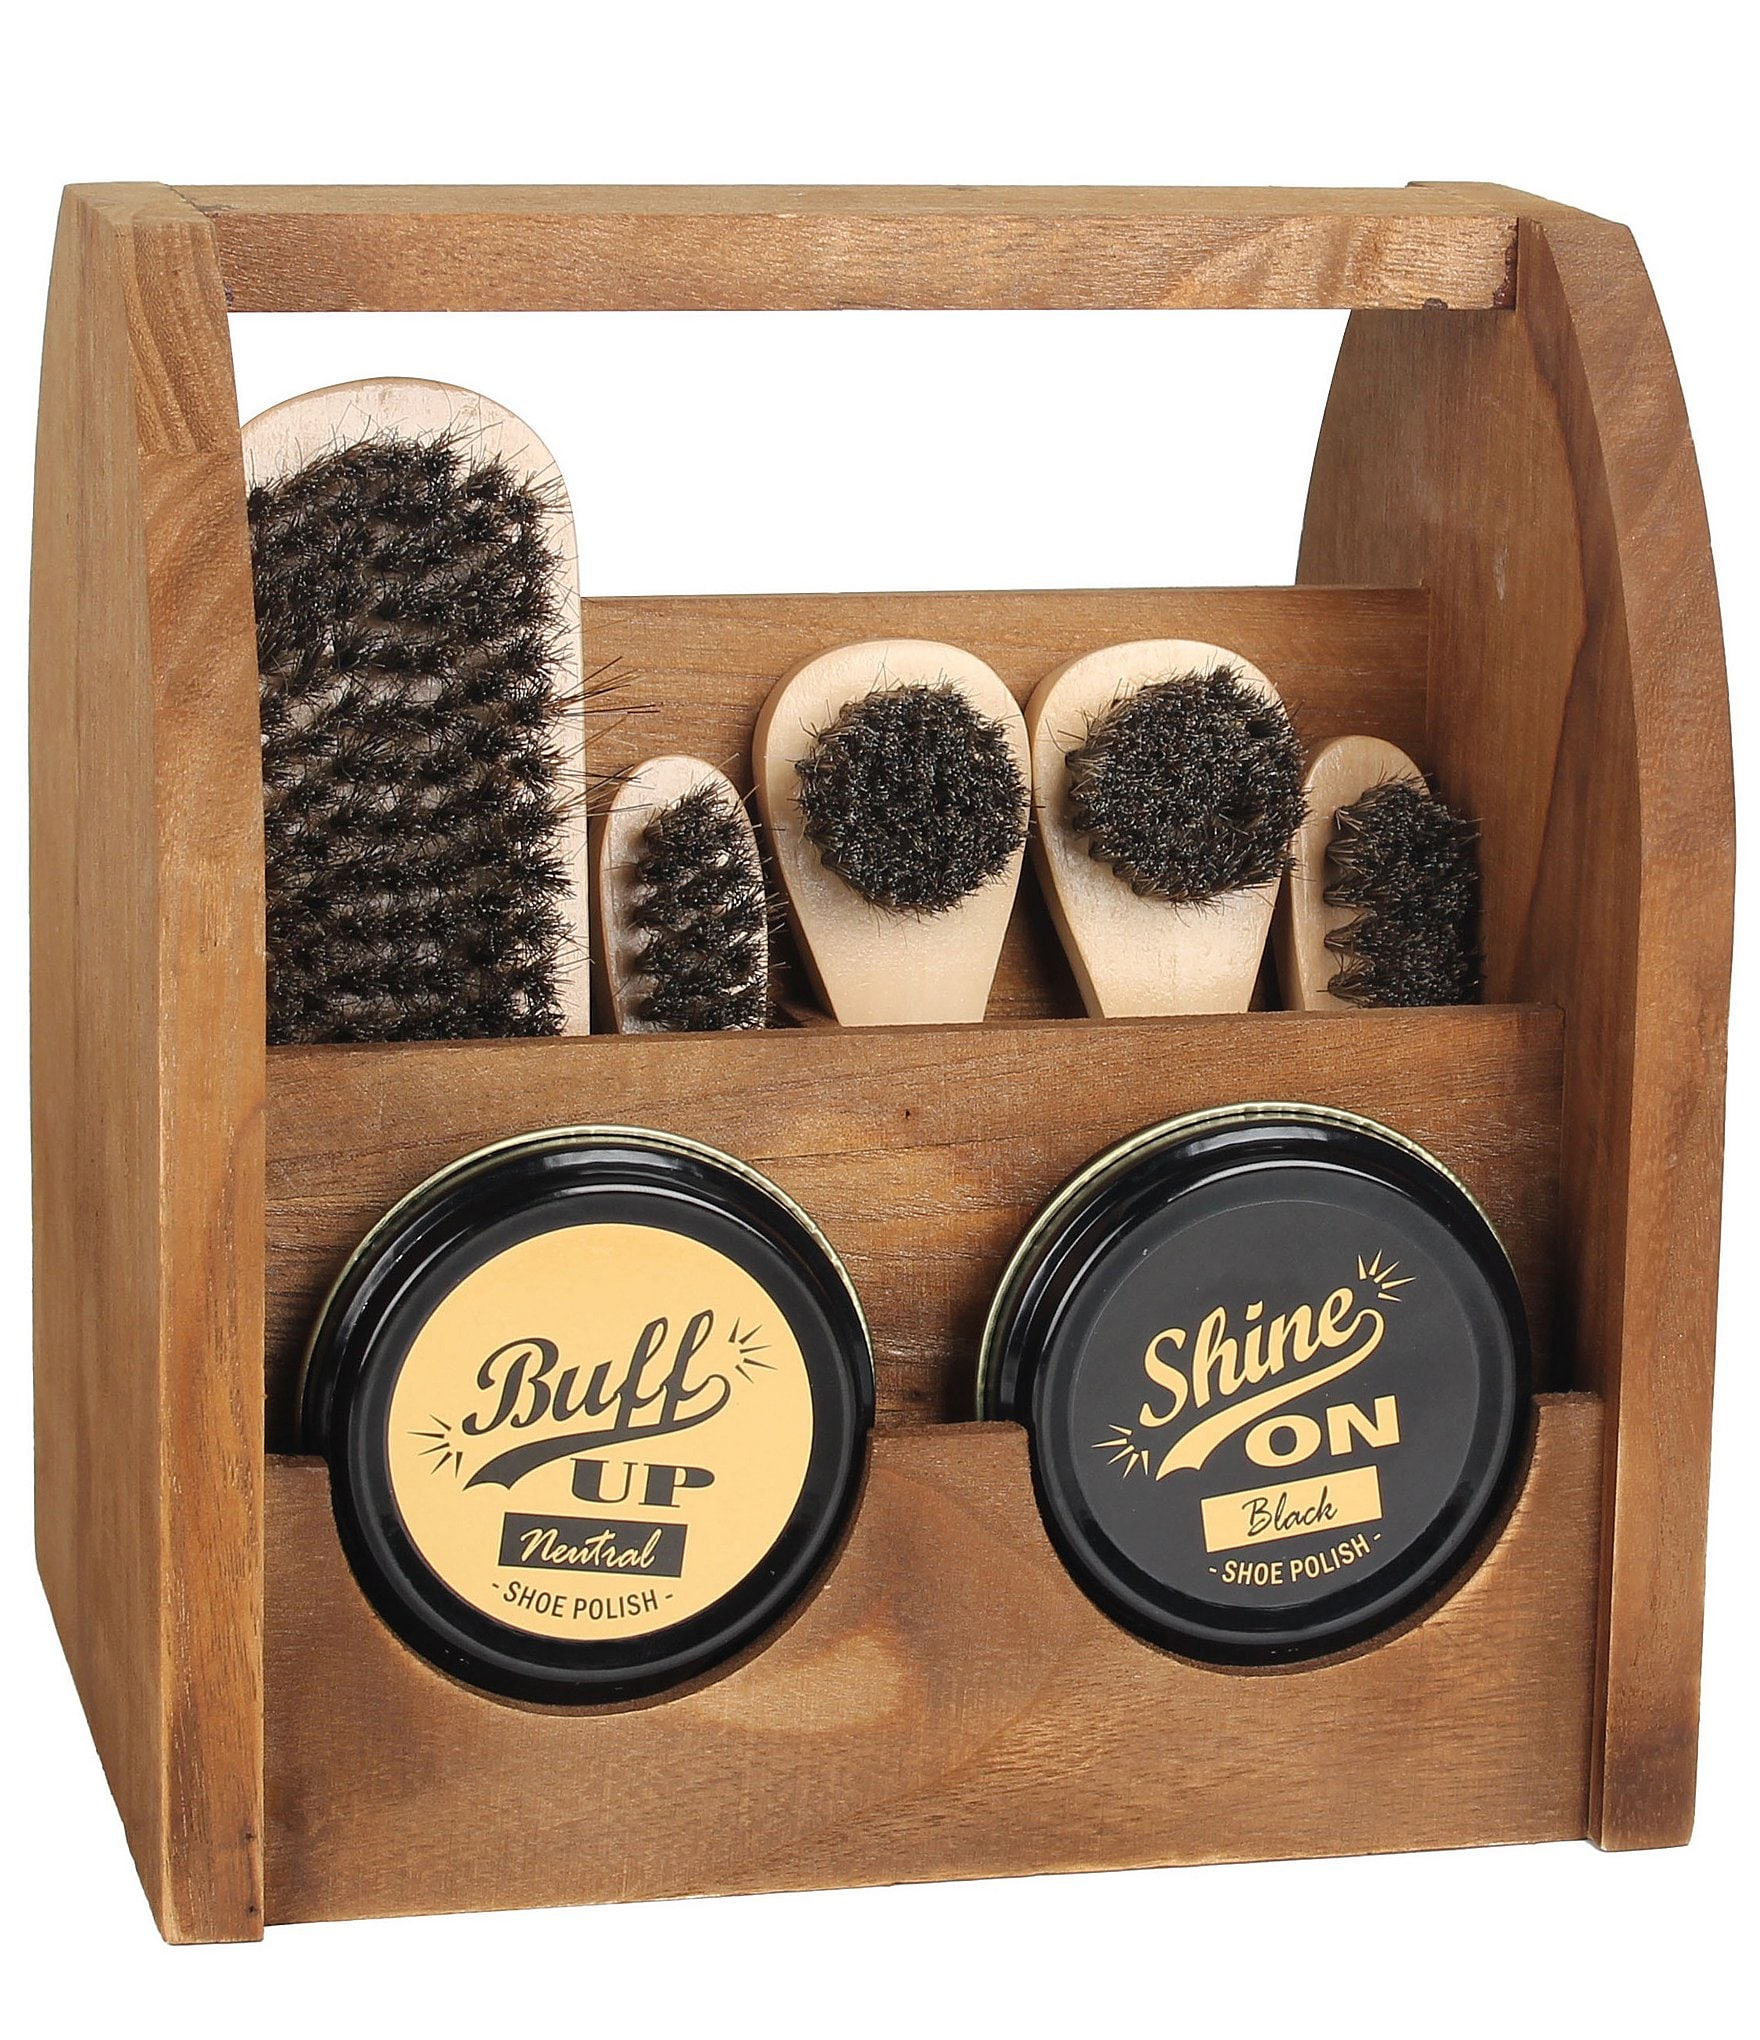 Shoe Shine Kits for sale in Suffolk County, New York